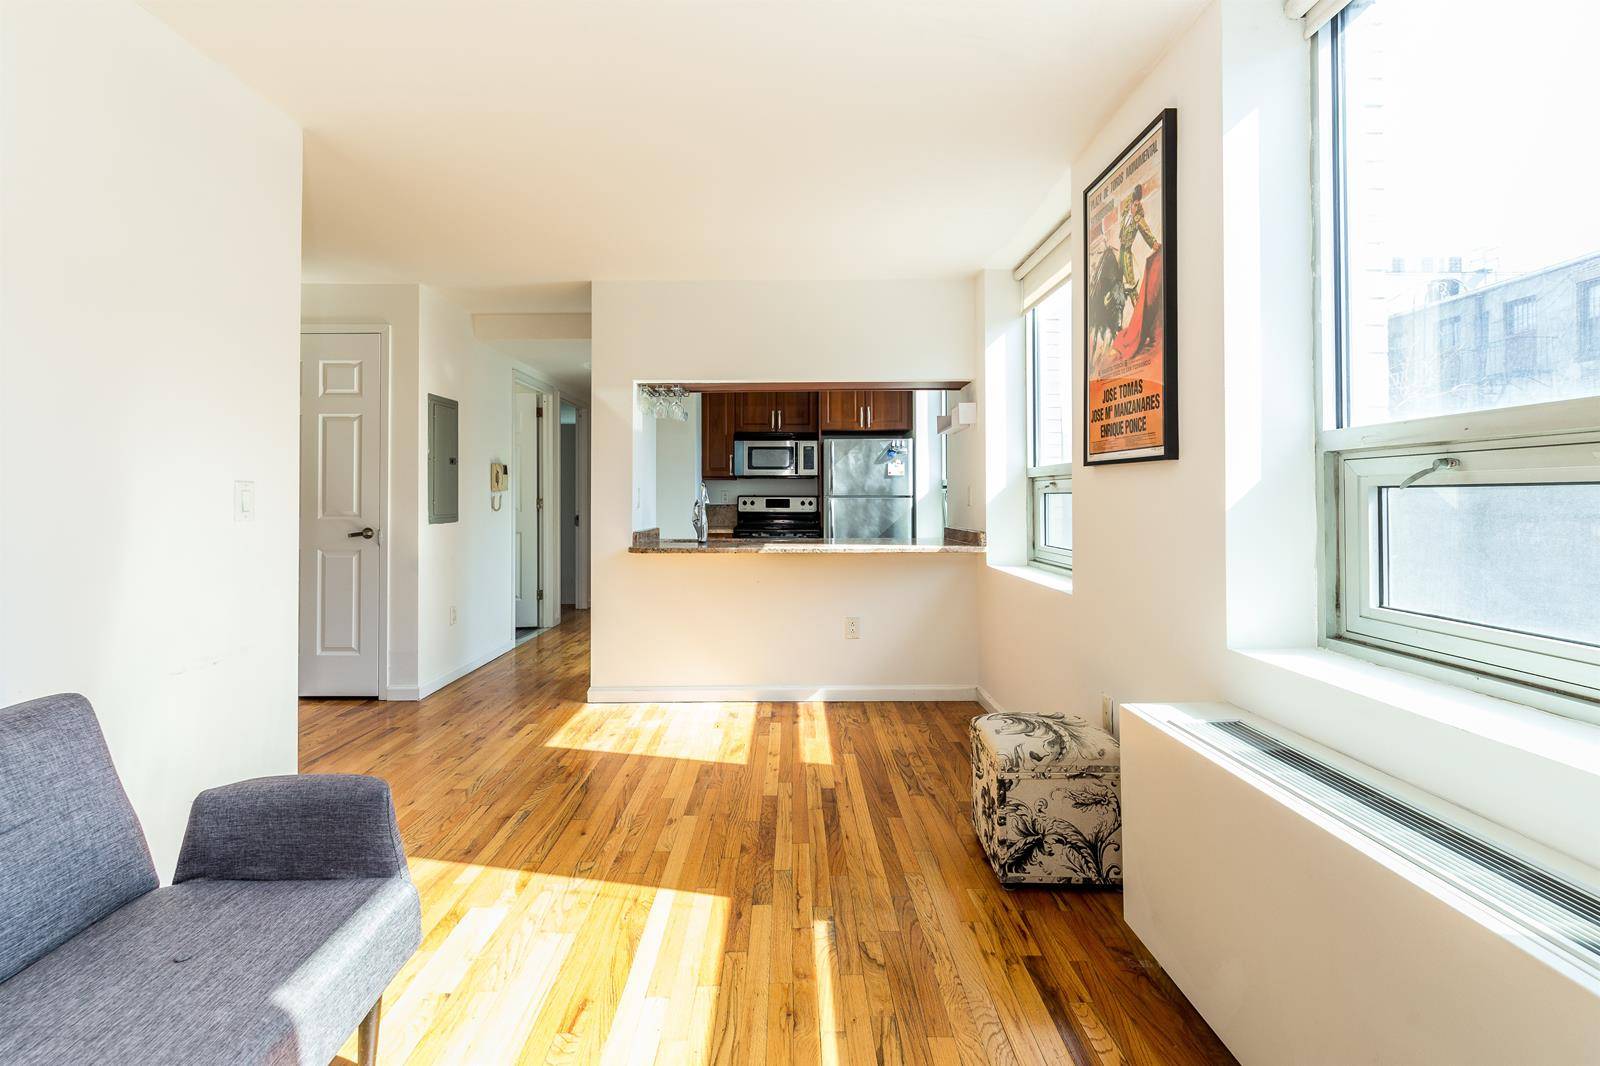 Welcome to your sun filled, bright and airy 2 bedroom condo.